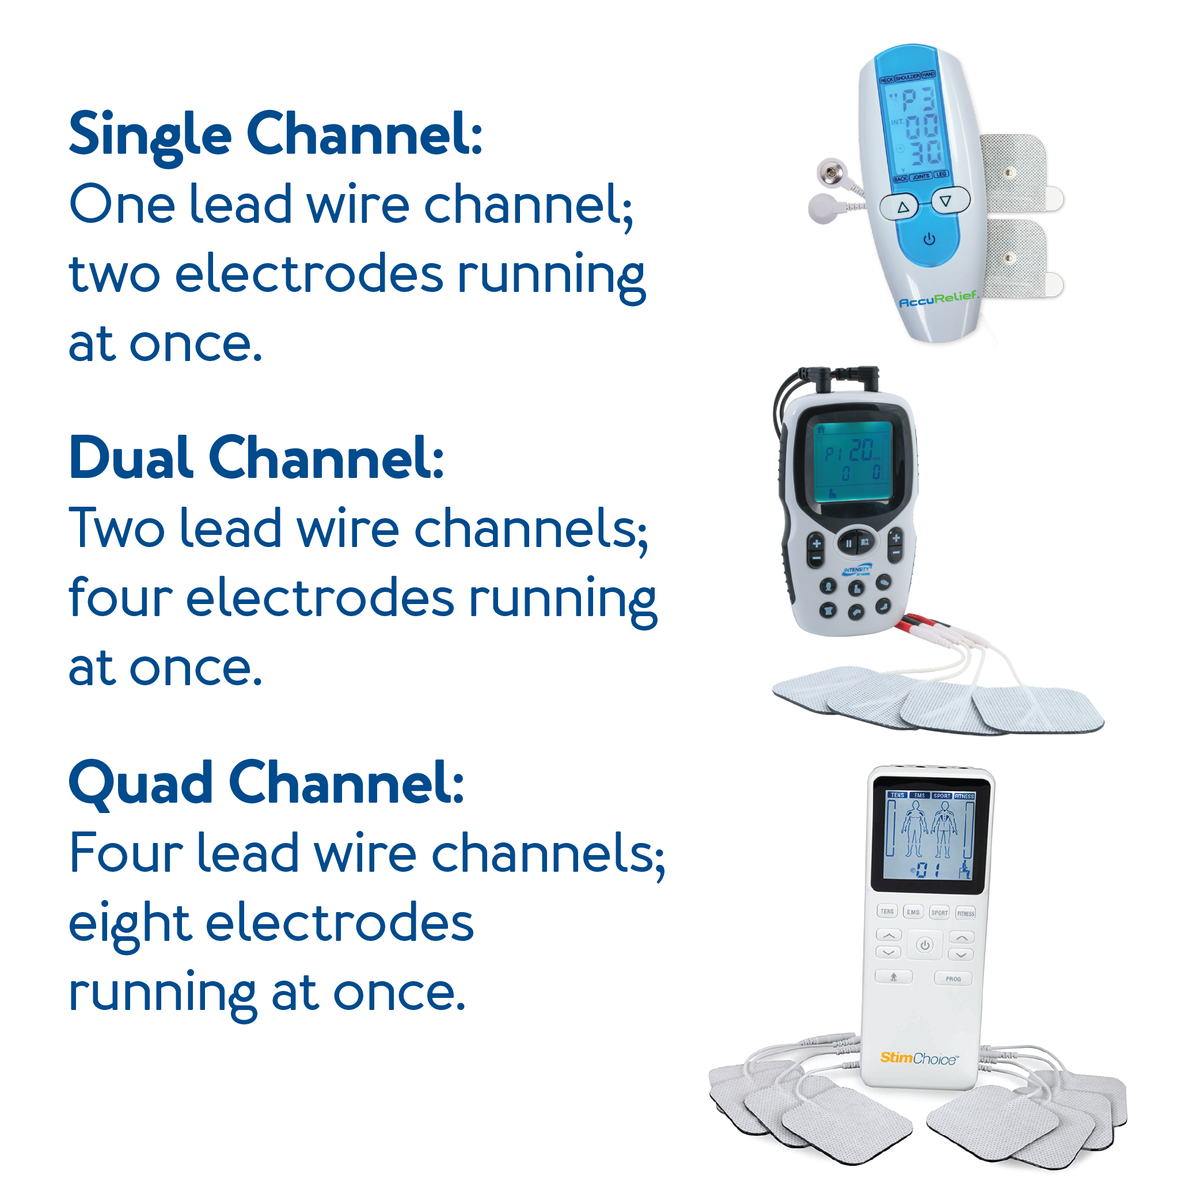 TENS Unit Channels : Further details are provided next to image